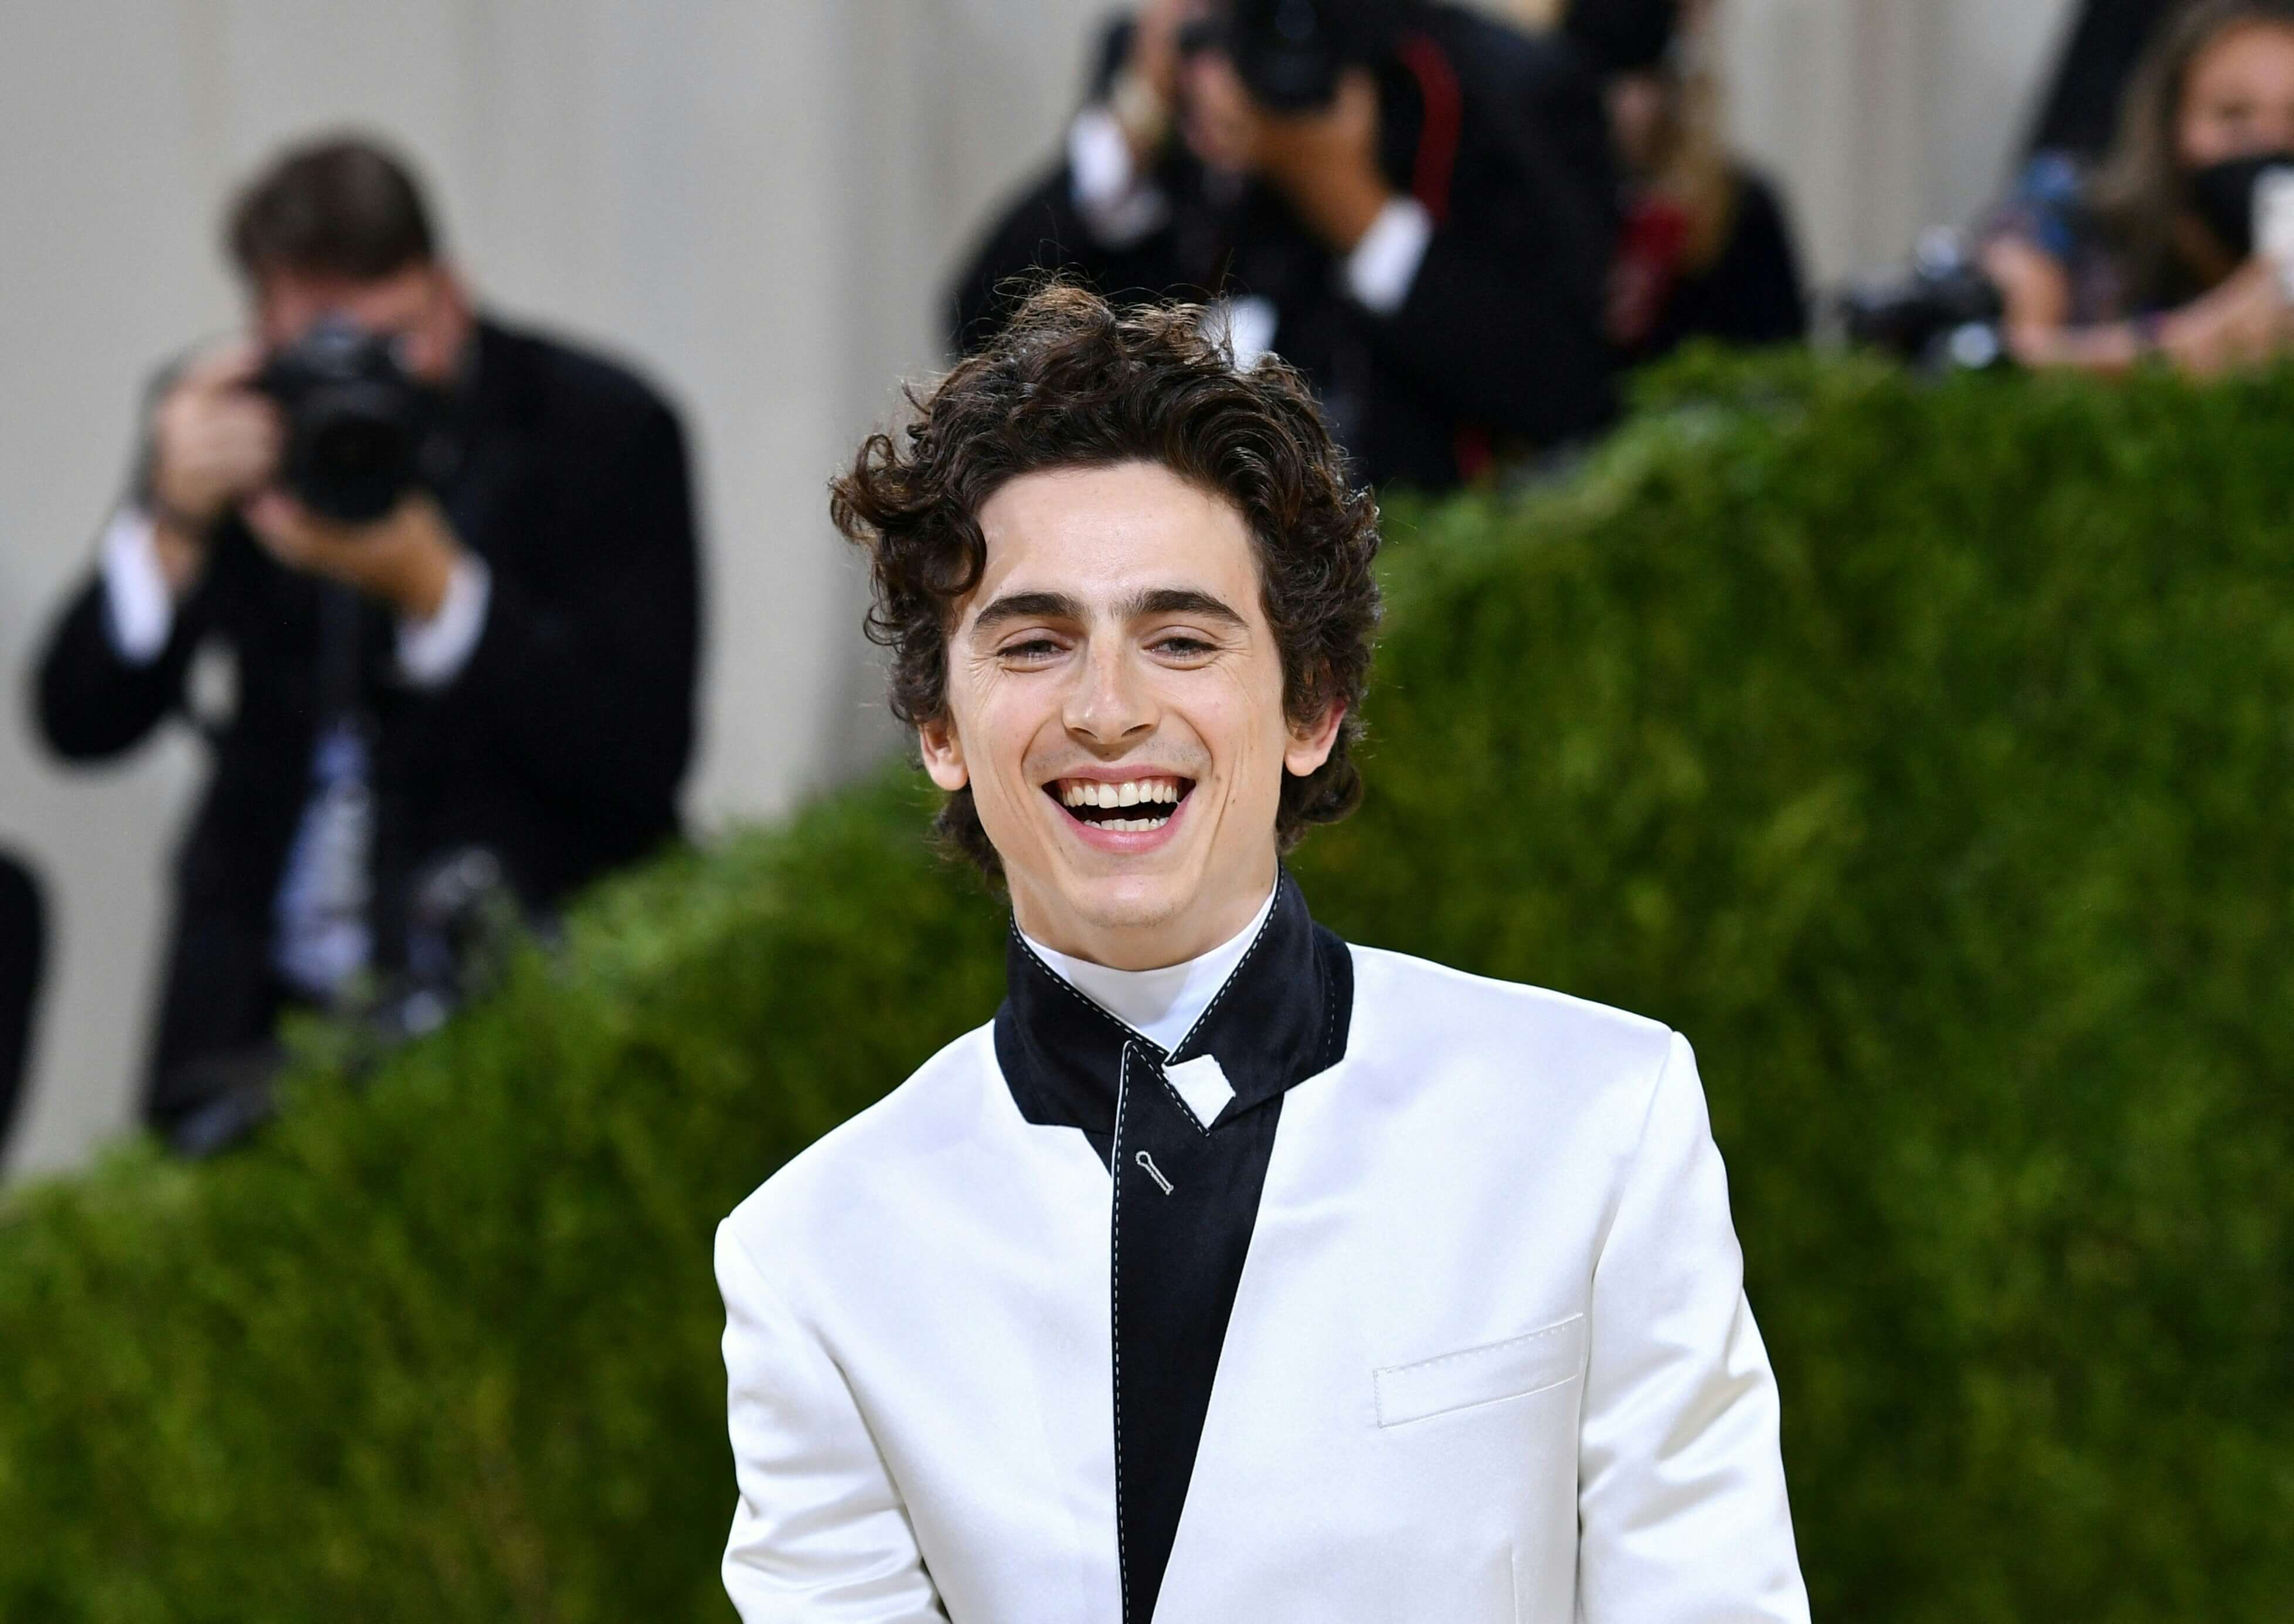 The schools and universities that made Timothée Chalamet